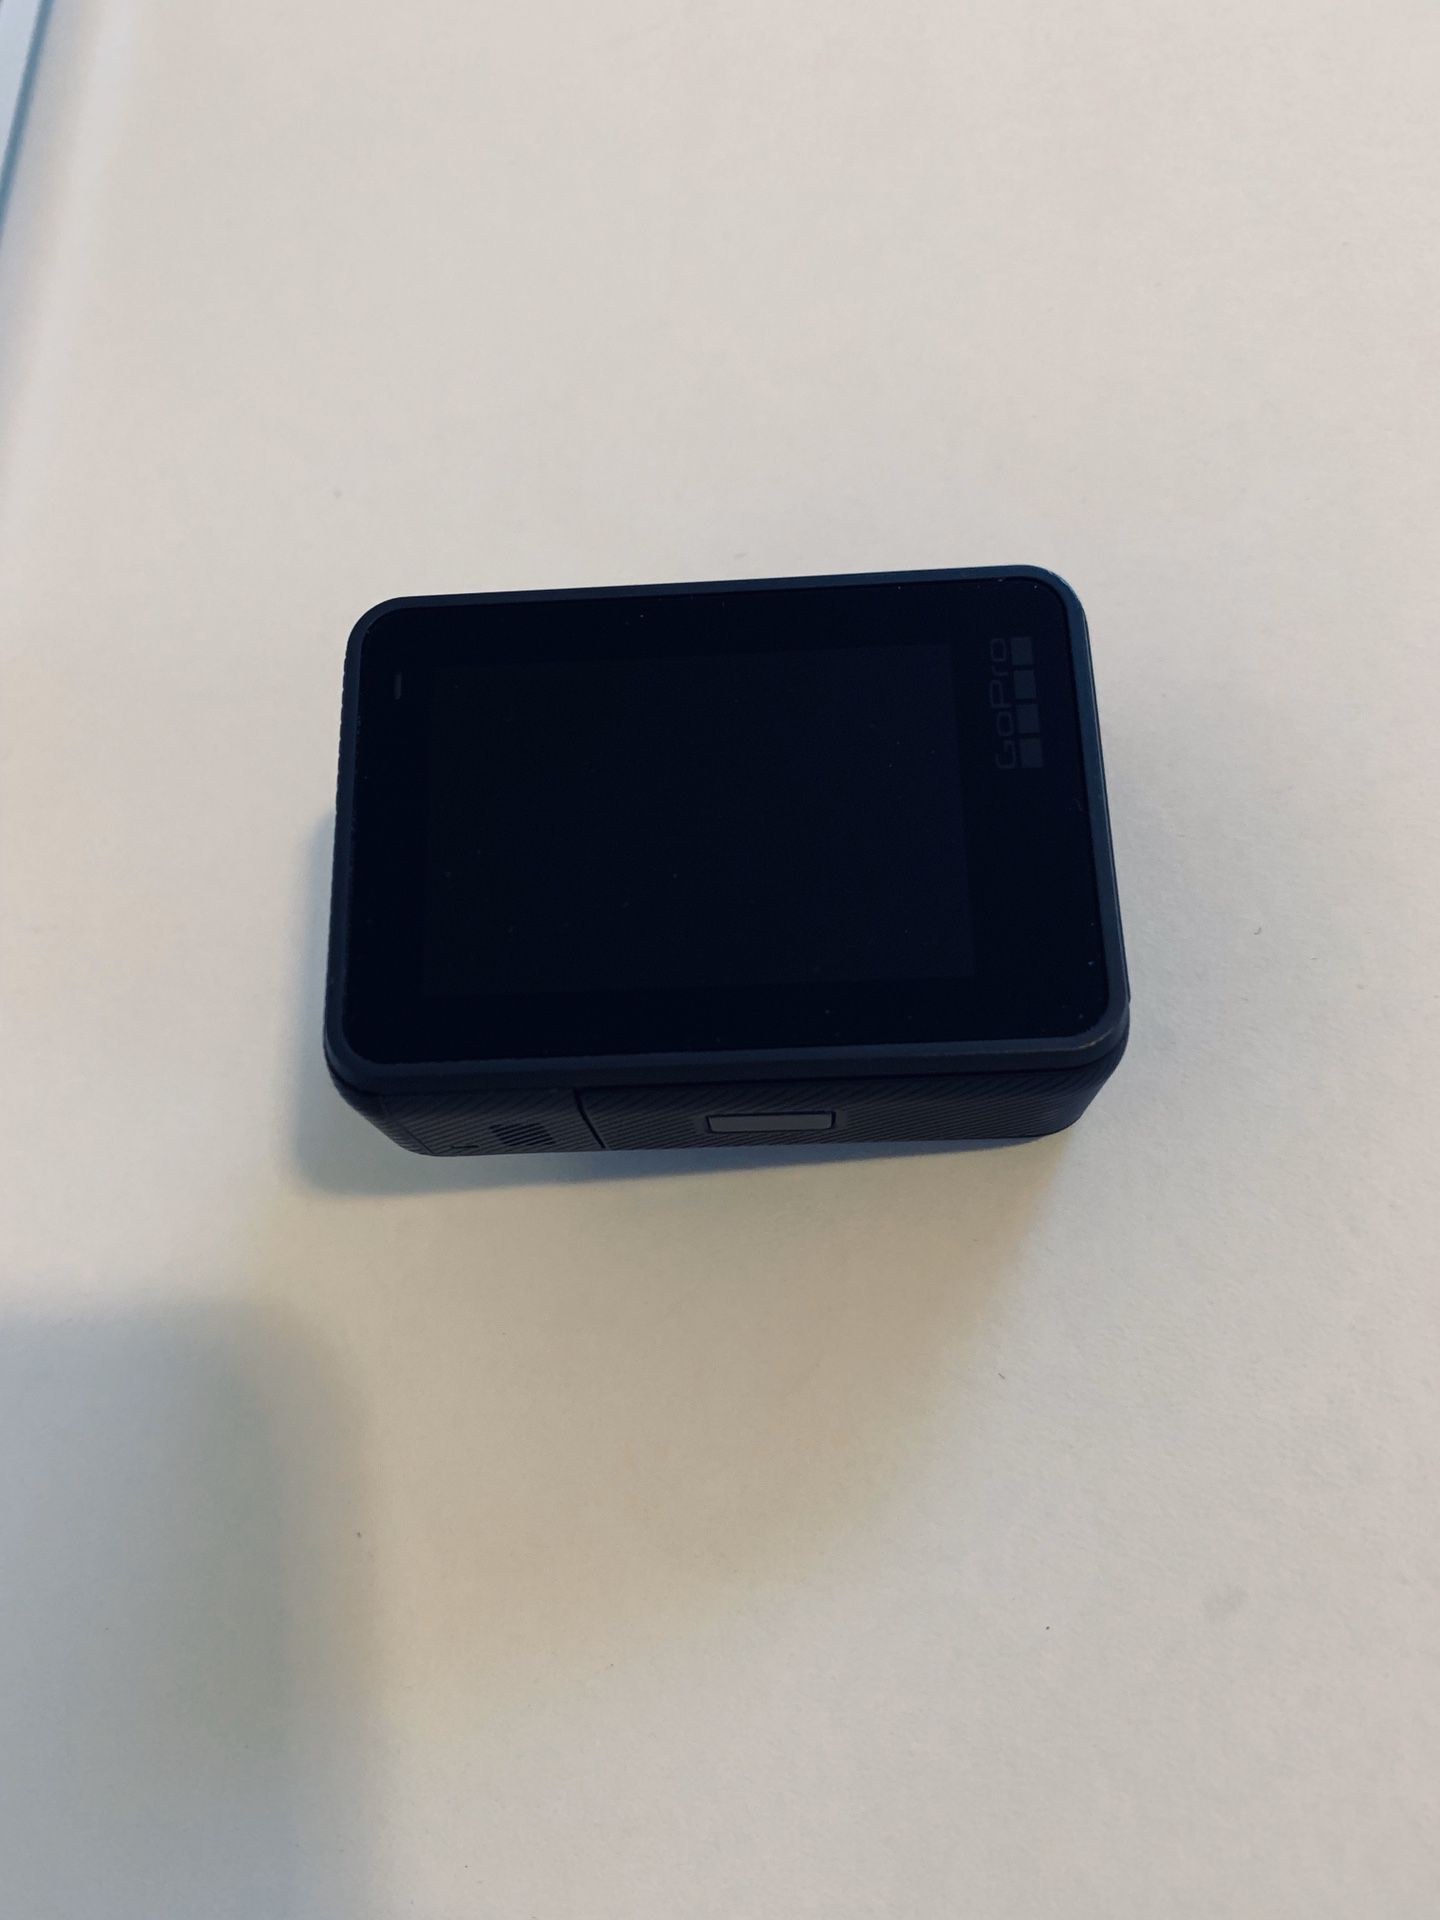 Gopro hero 6 Black, mint condition, used it once or twice only.